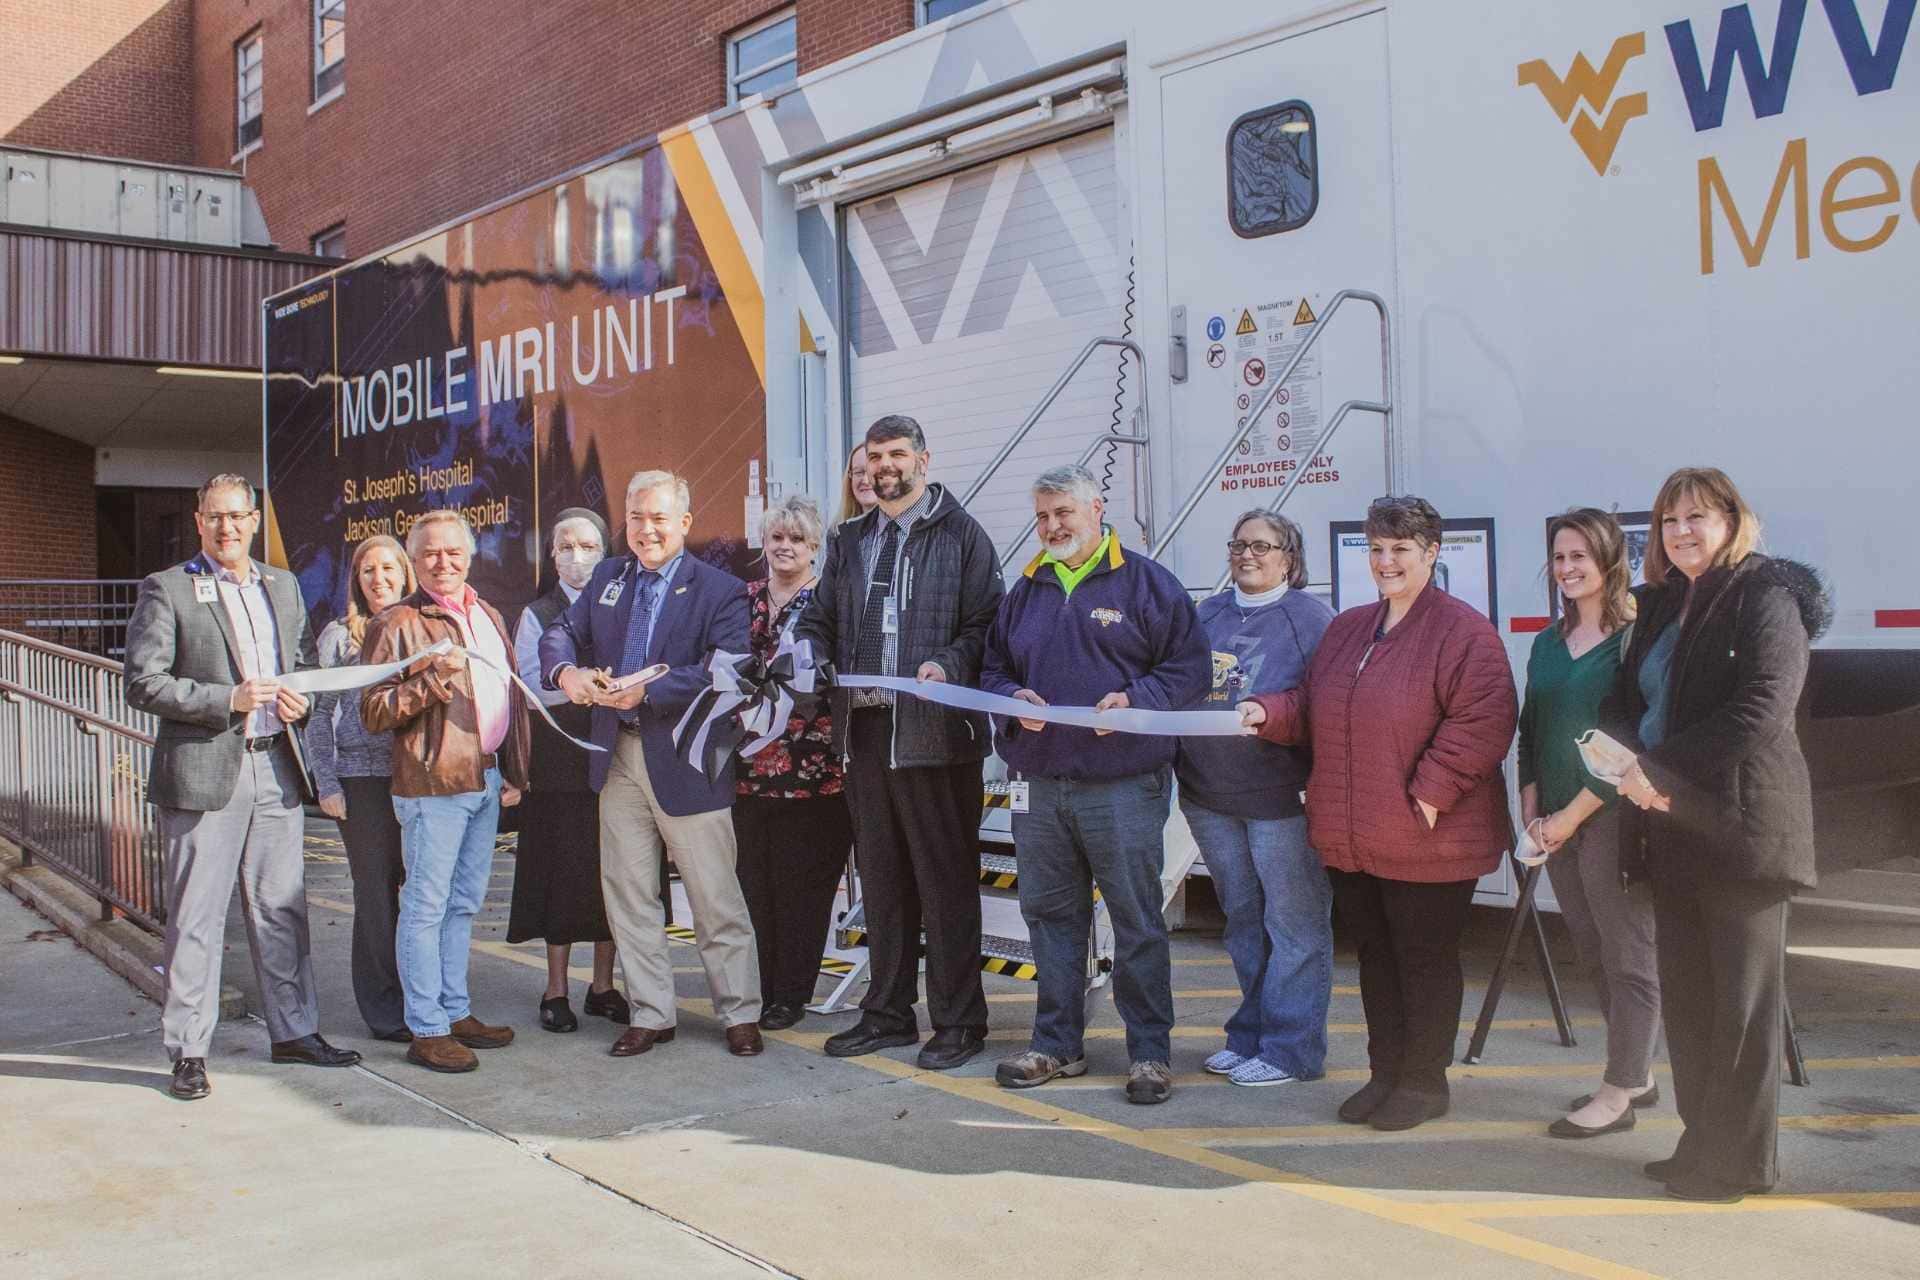 Buckhannon-Upshur Chamber of Commerce members joined representatives from WVU Medicine St. Joseph's Hospital to official open the doors to a new Mobile MRI Unit on Tuesday.